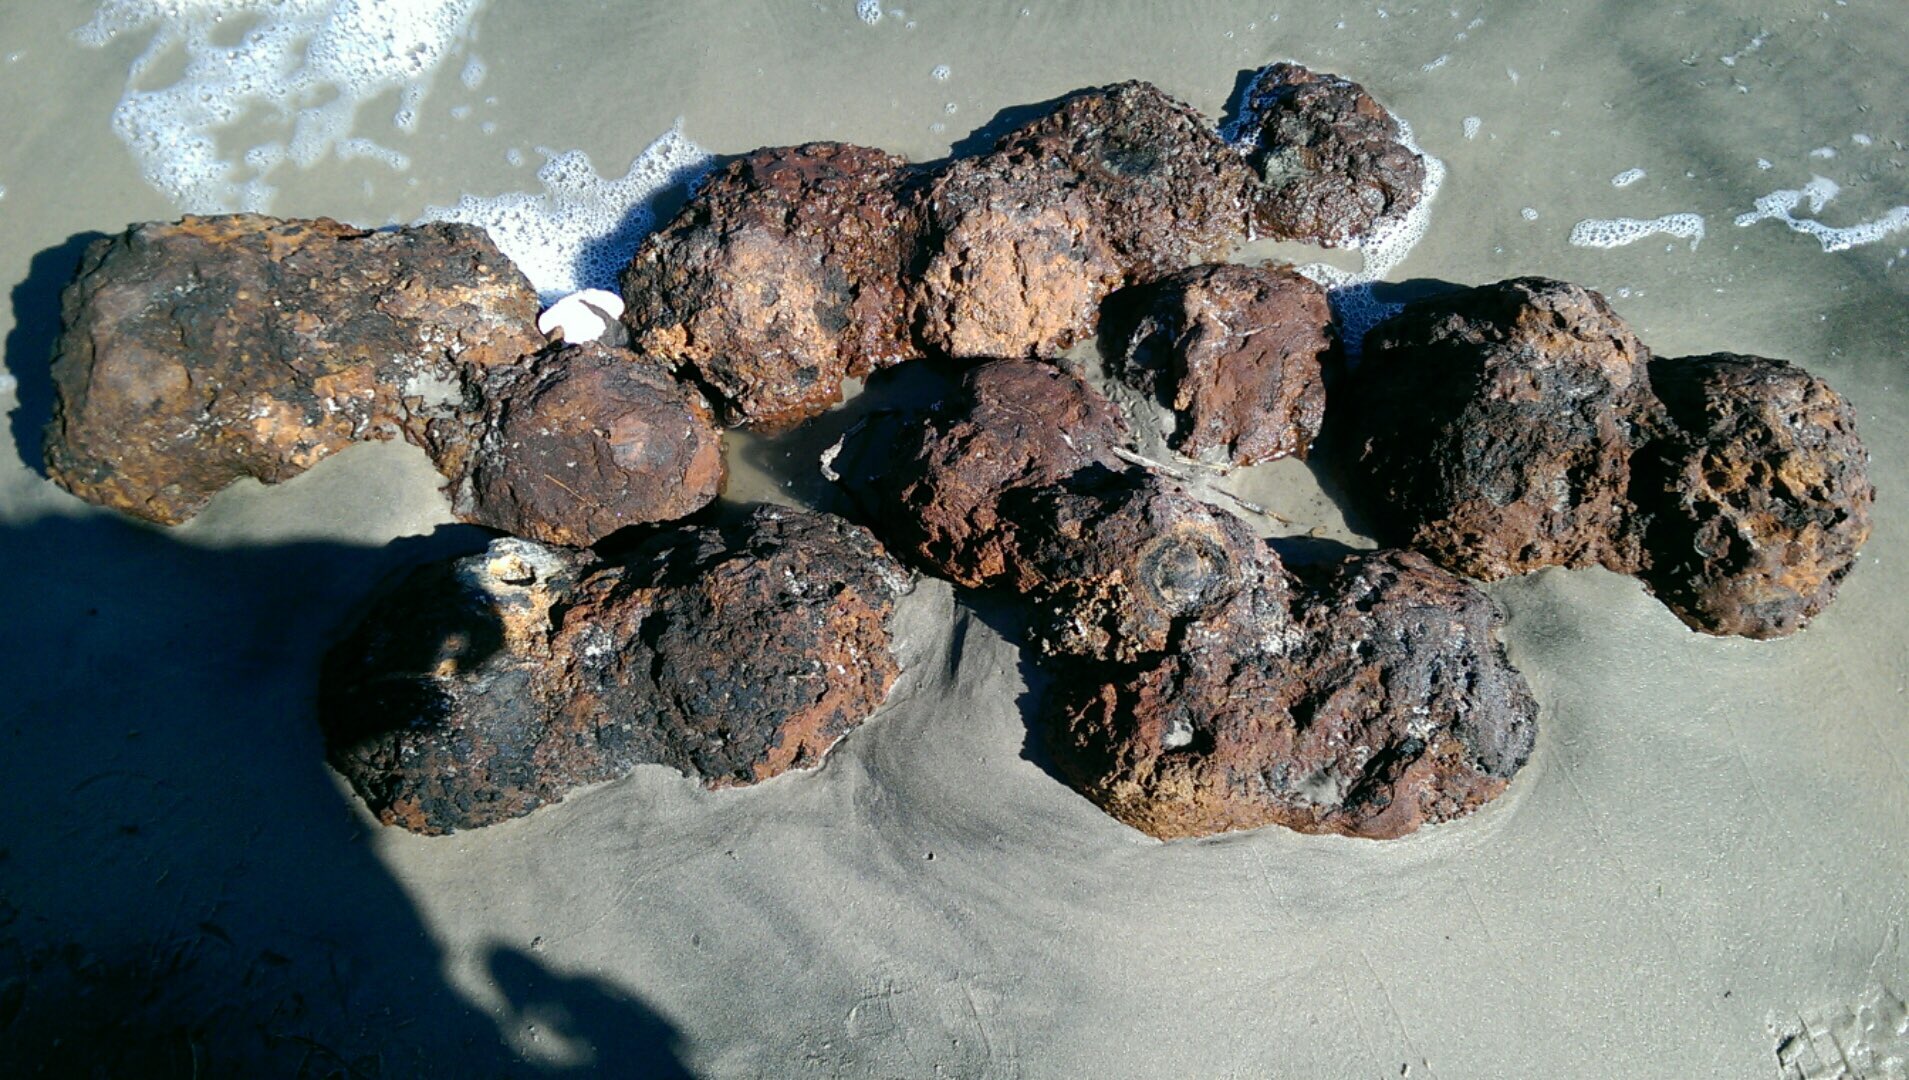 Civil War-era canon balls are uncovered after Hurricane Matthew in in South Carolina, Folly Beach, on Oct. 9, 2016 (Charleston County Sheriff's Office)